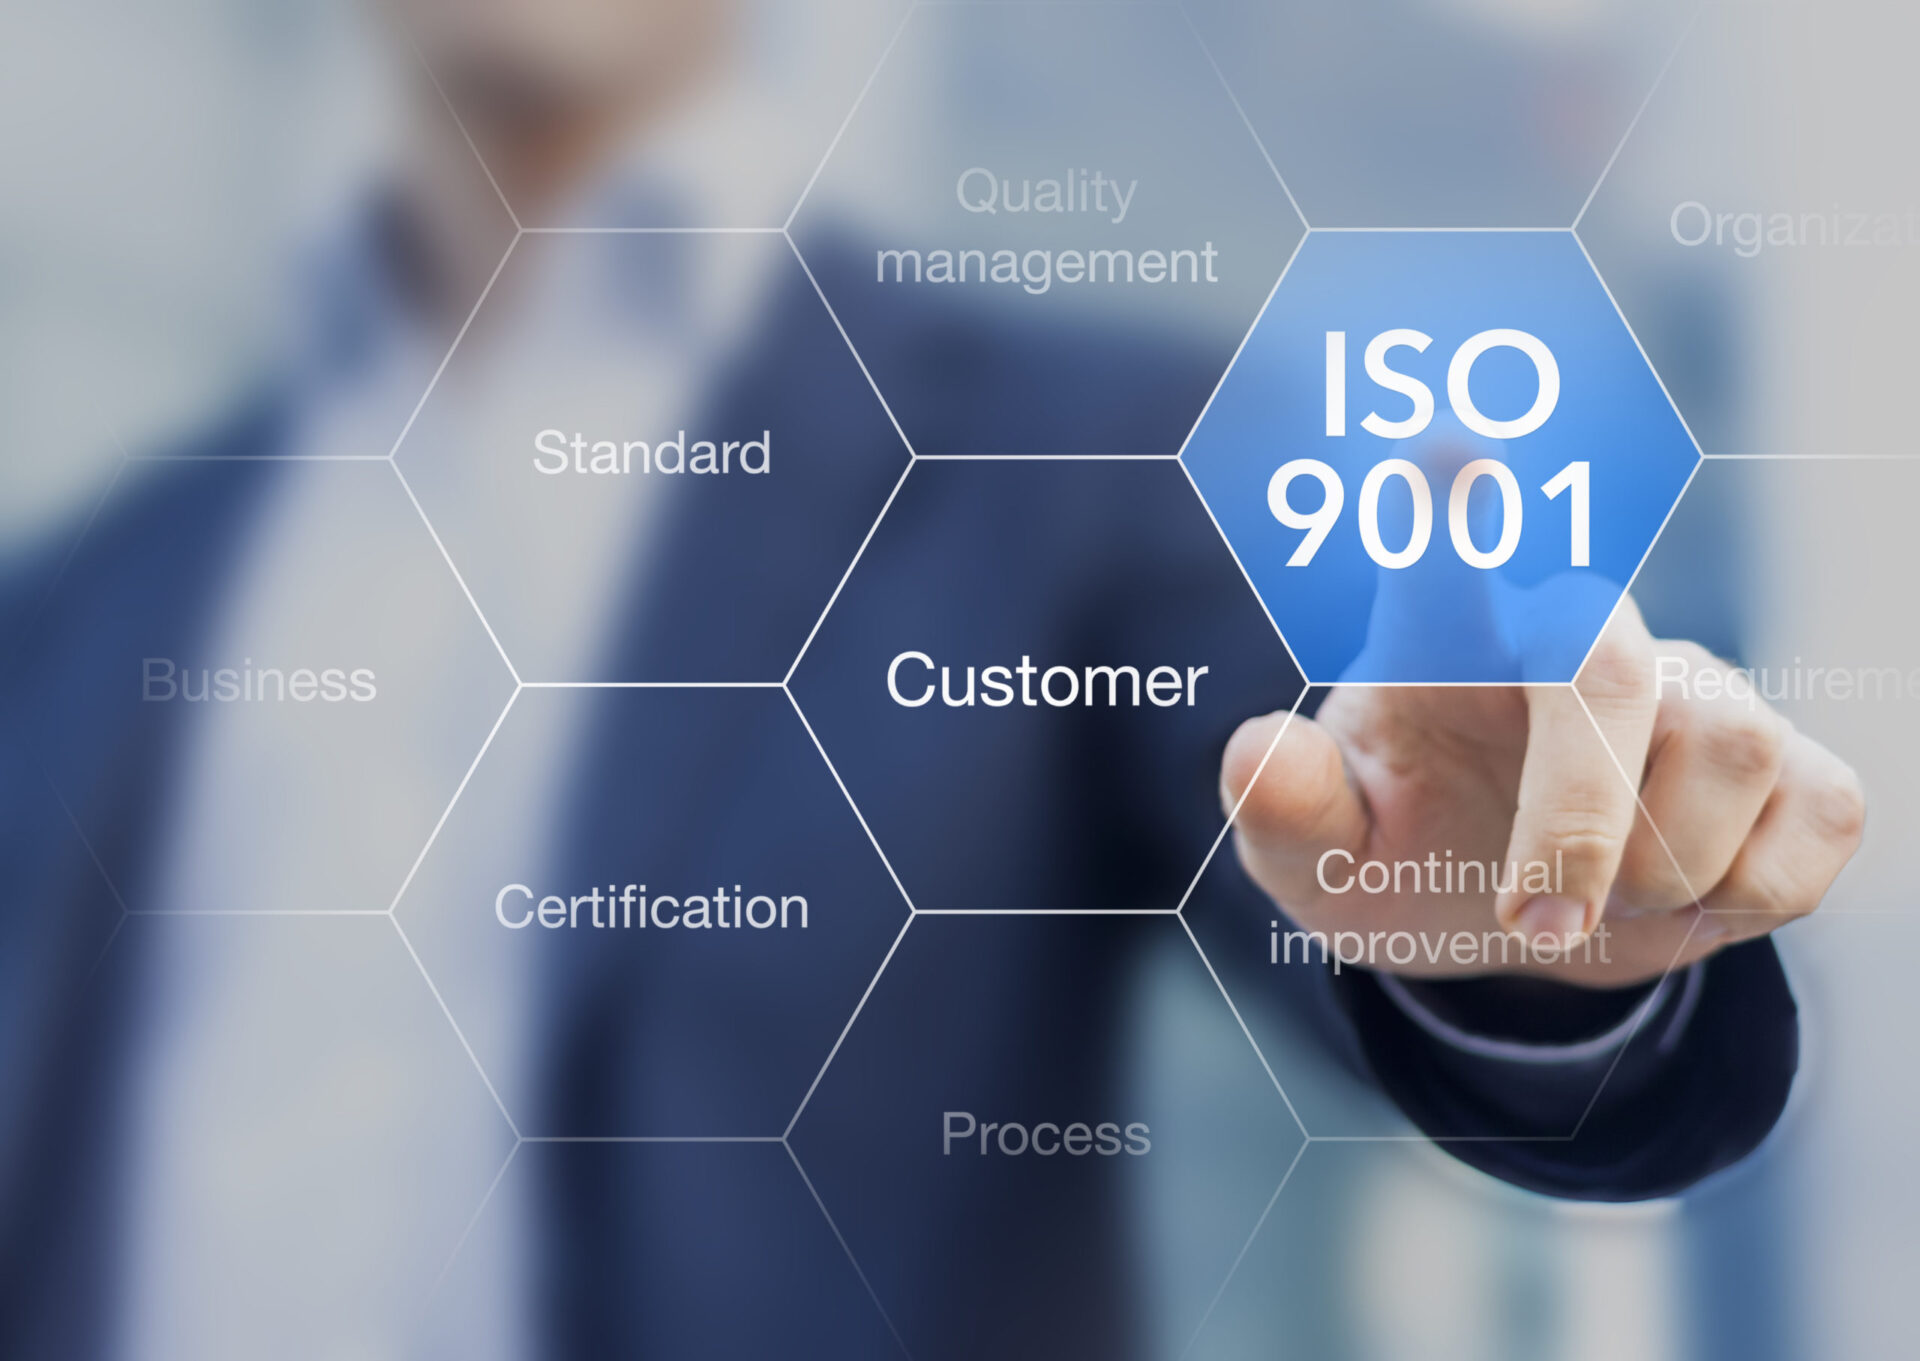 When can an organization go for ISO Certification?